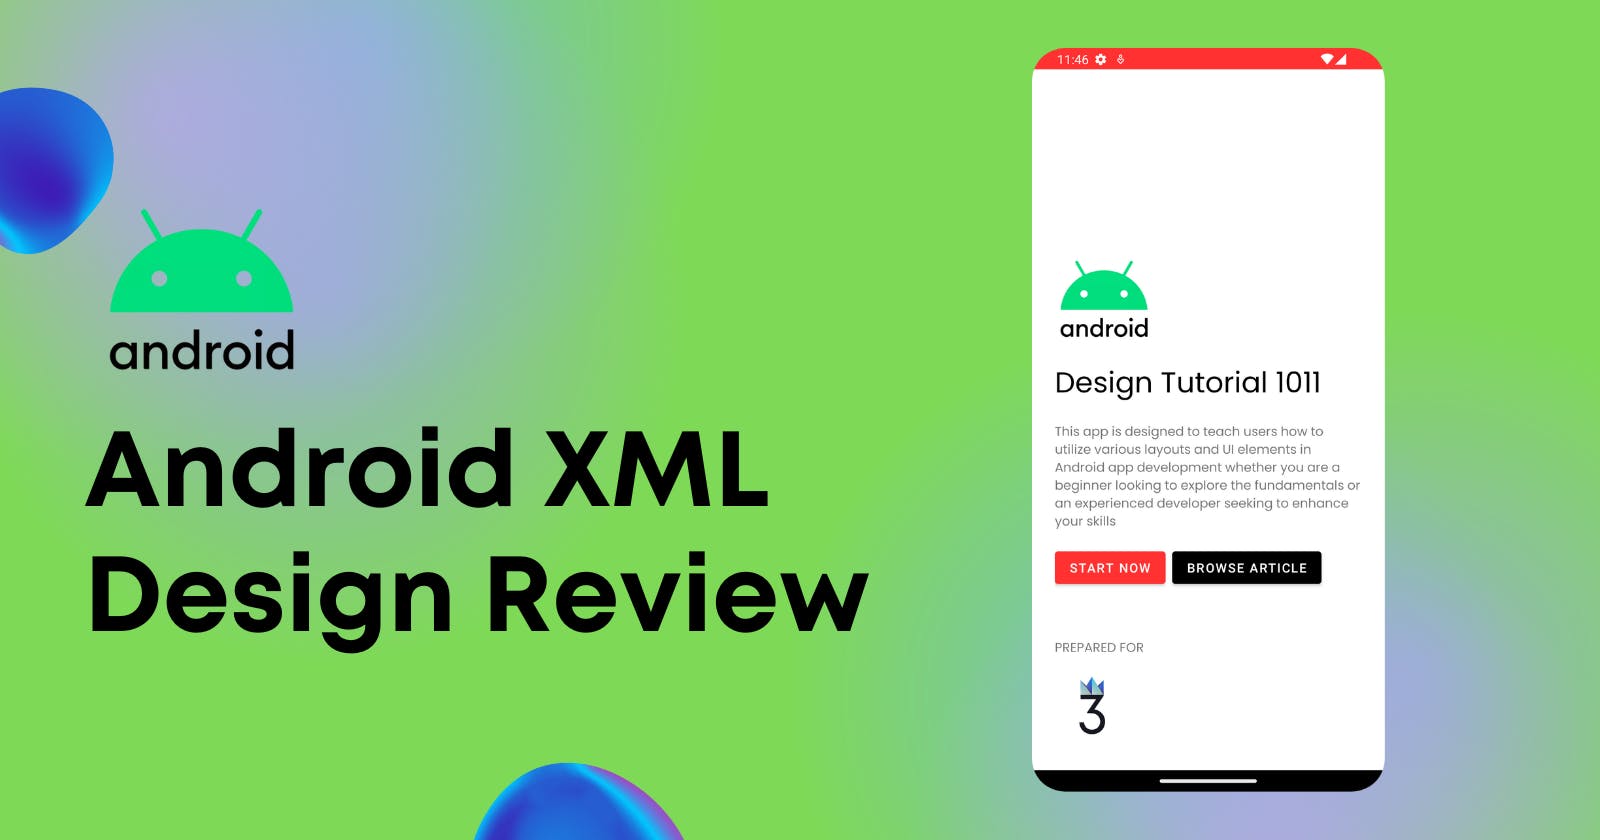 Android XML Design Review